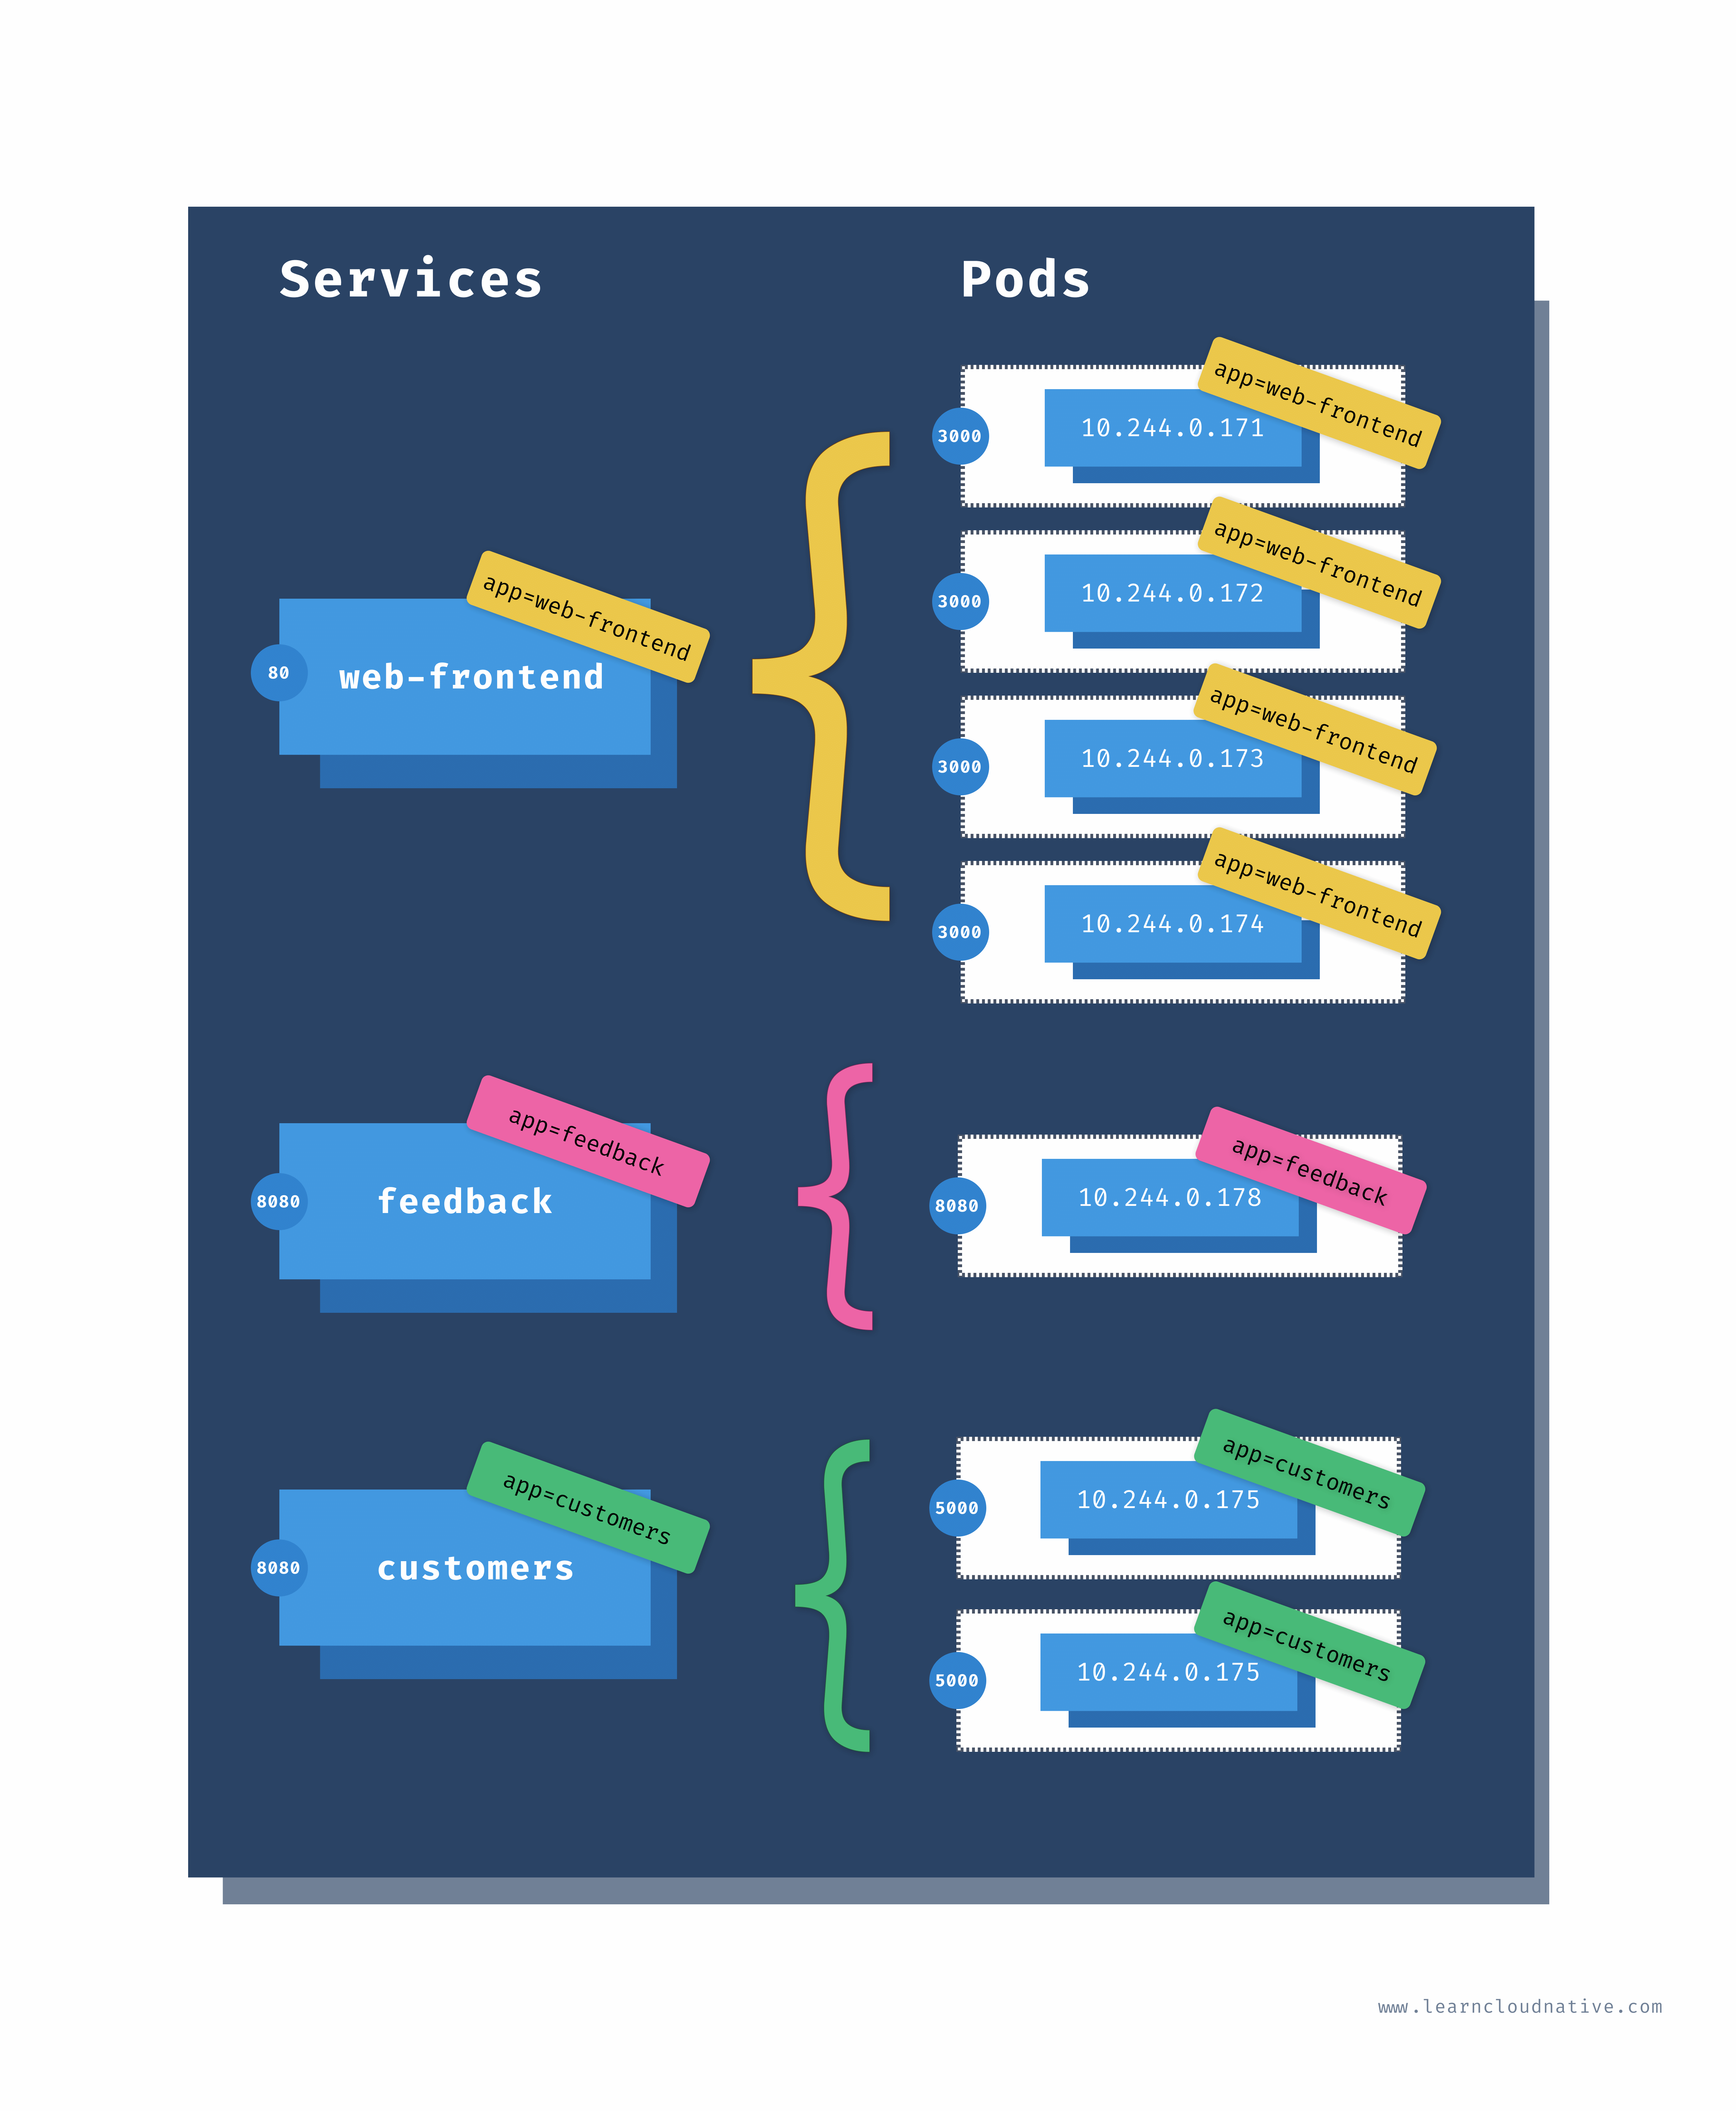 Kubernetes services and pods